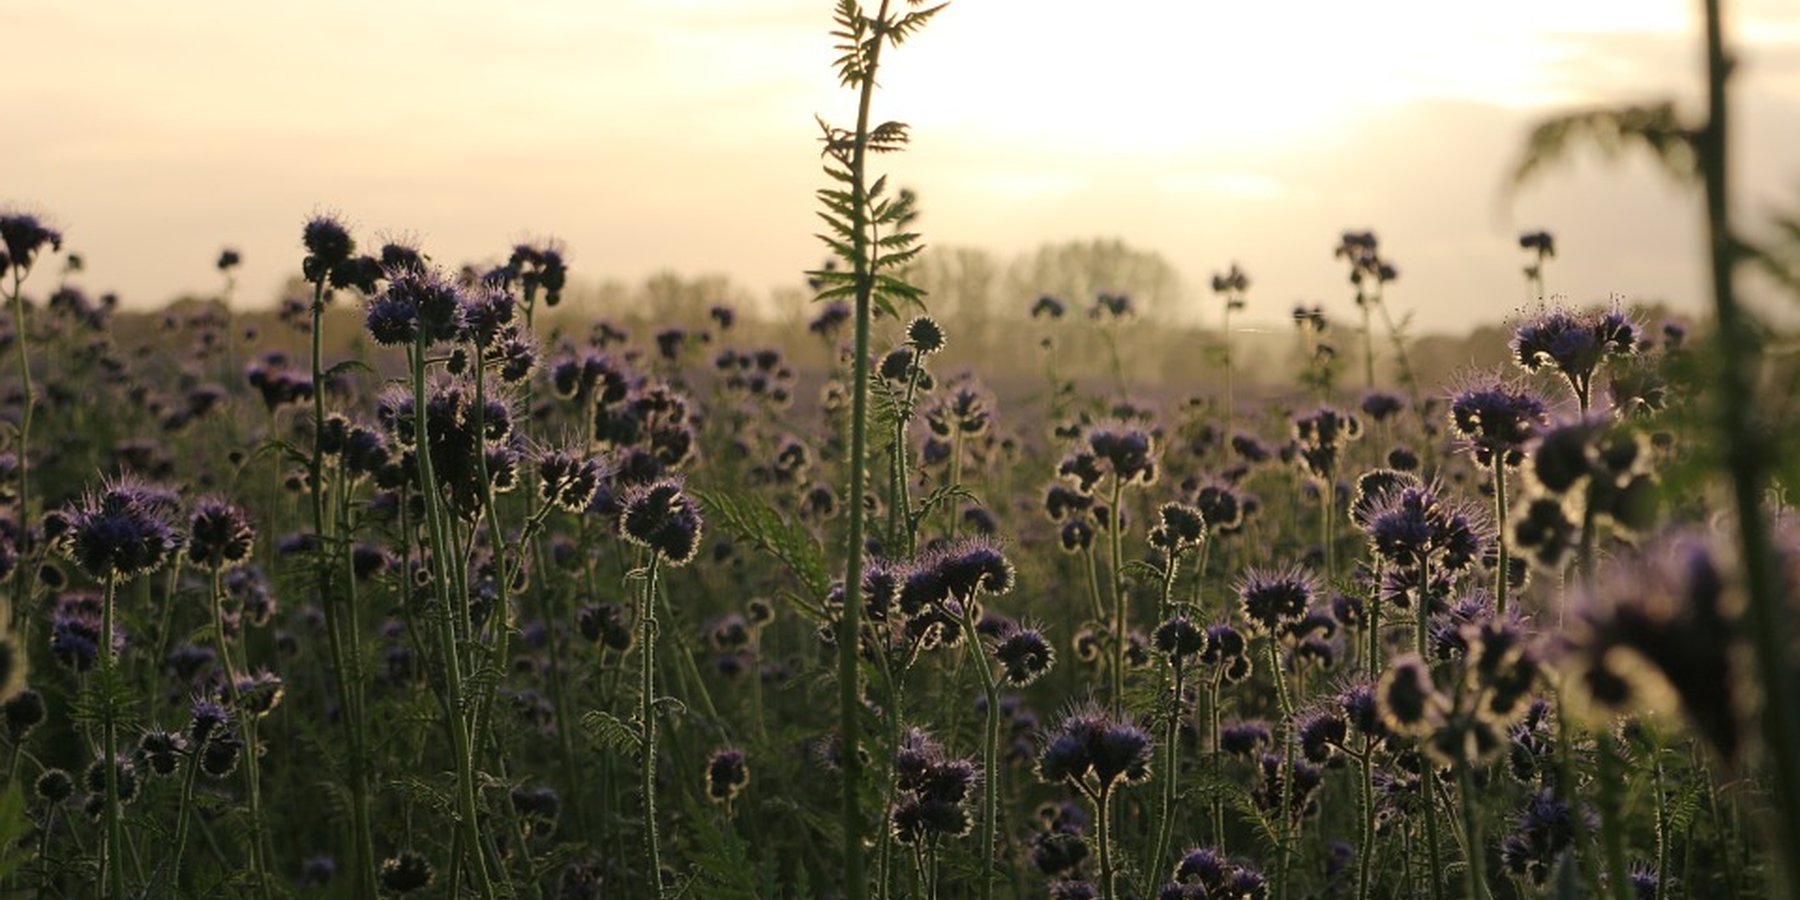 Phacelia tanacetifolia is a species of phacelia known by the common names lacy phacelia, blue tansy or purple tansy.